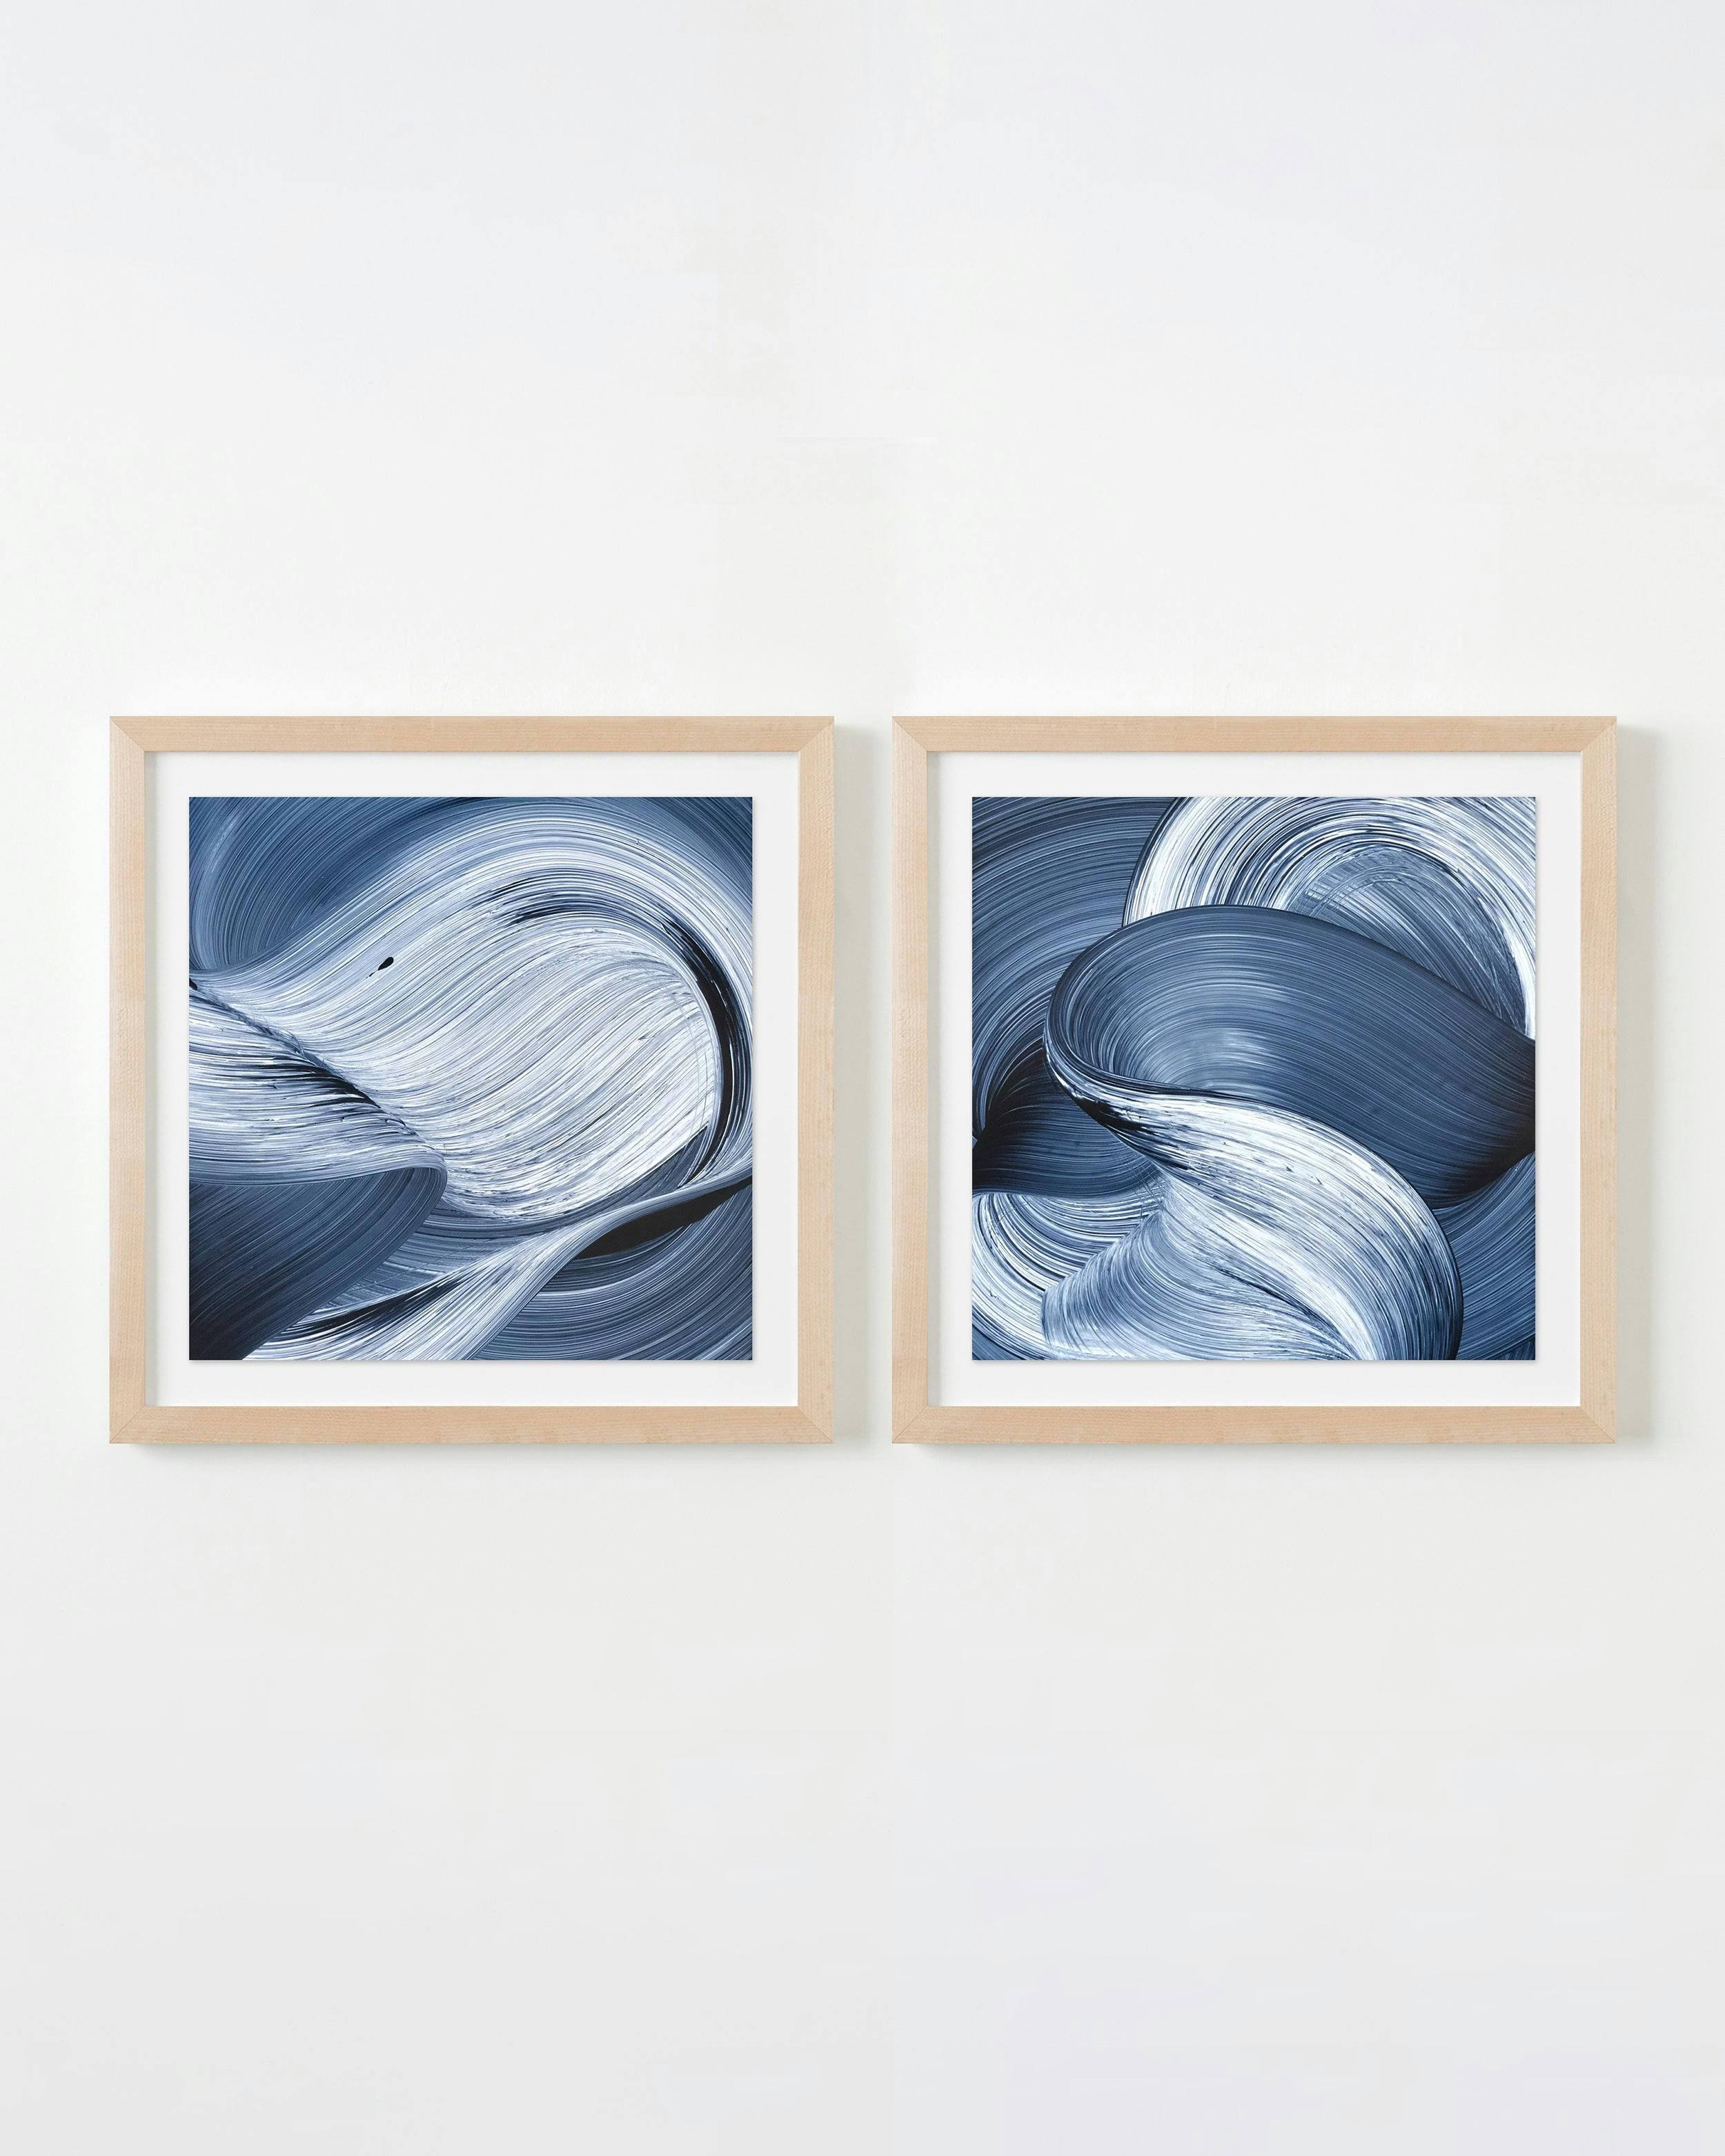 Painting by Kostas Papakostas titled "Secrets of the sea (Diptych)".